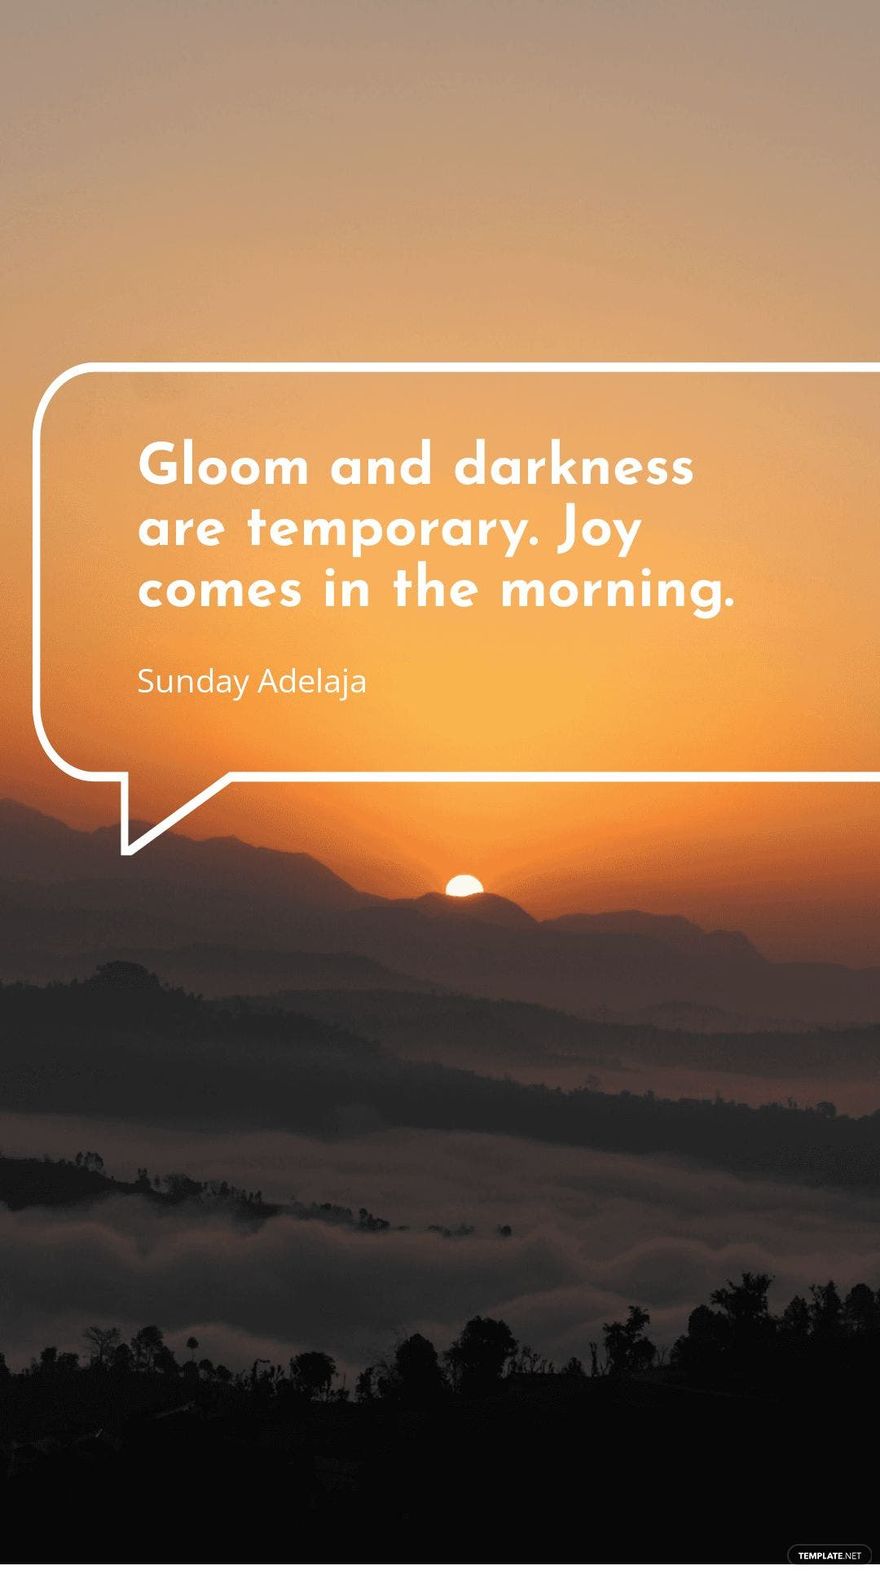 Sunday Adelaja - Gloom and darkness are temporary. Joy comes in the morning.